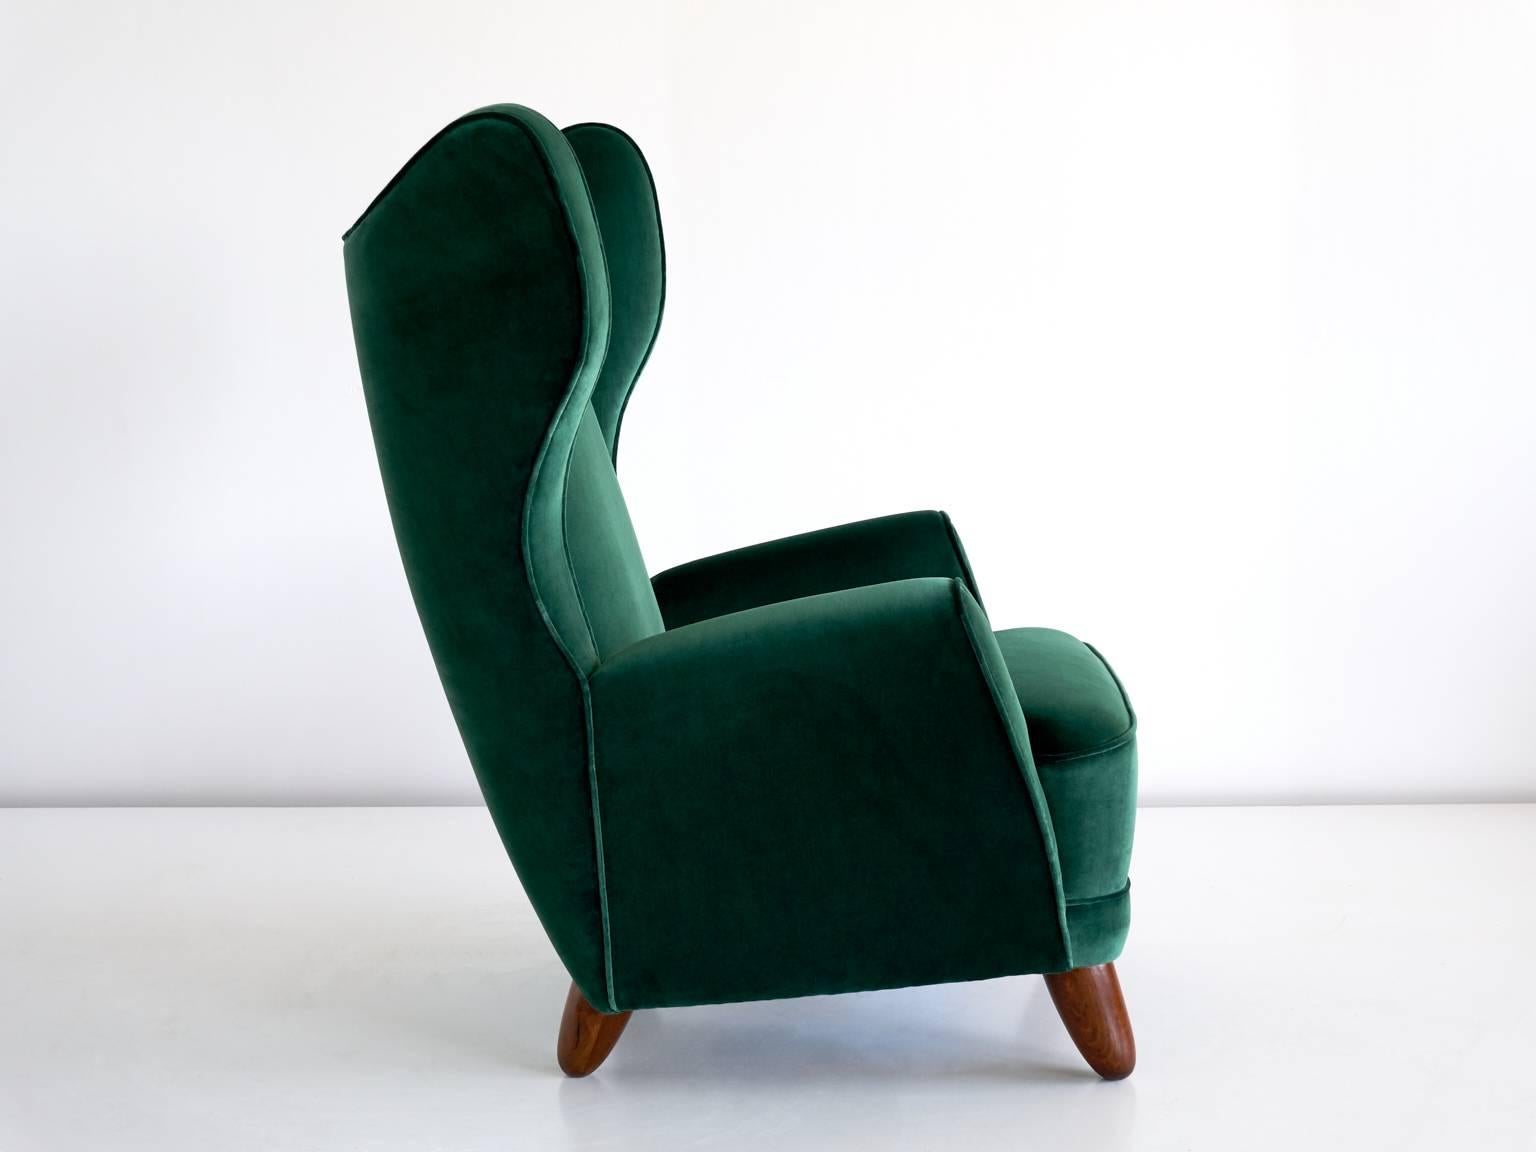 Italian Exceptional 1940s Wingback Chair Attributed to Guglielmo Ulrich